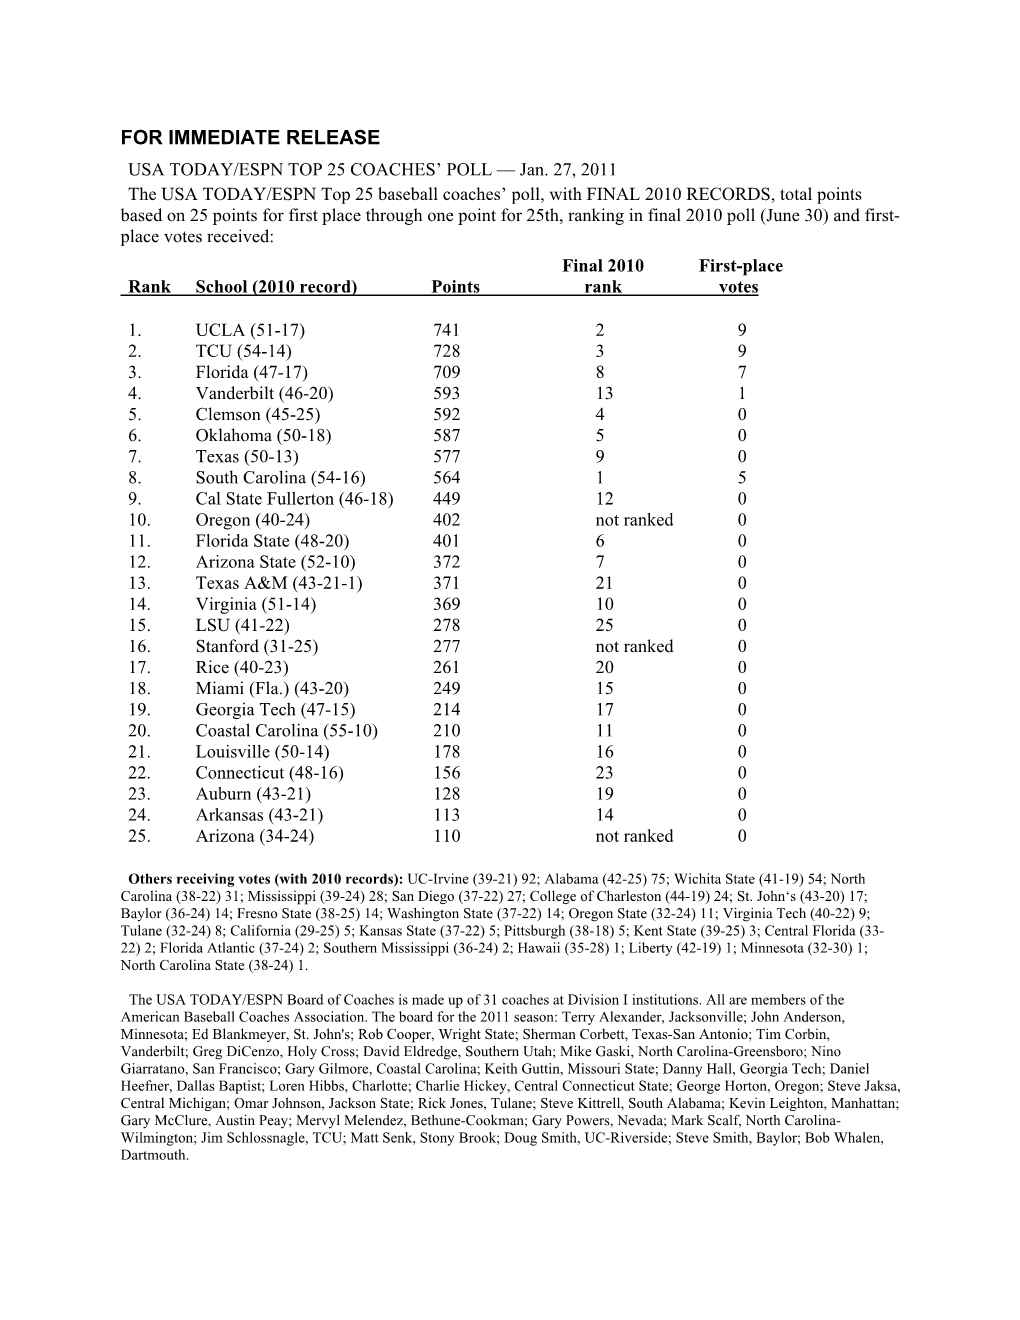 FOR IMMEDIATE RELEASE USA TODAY/ESPN TOP 25 COACHES’ POLL — Jan